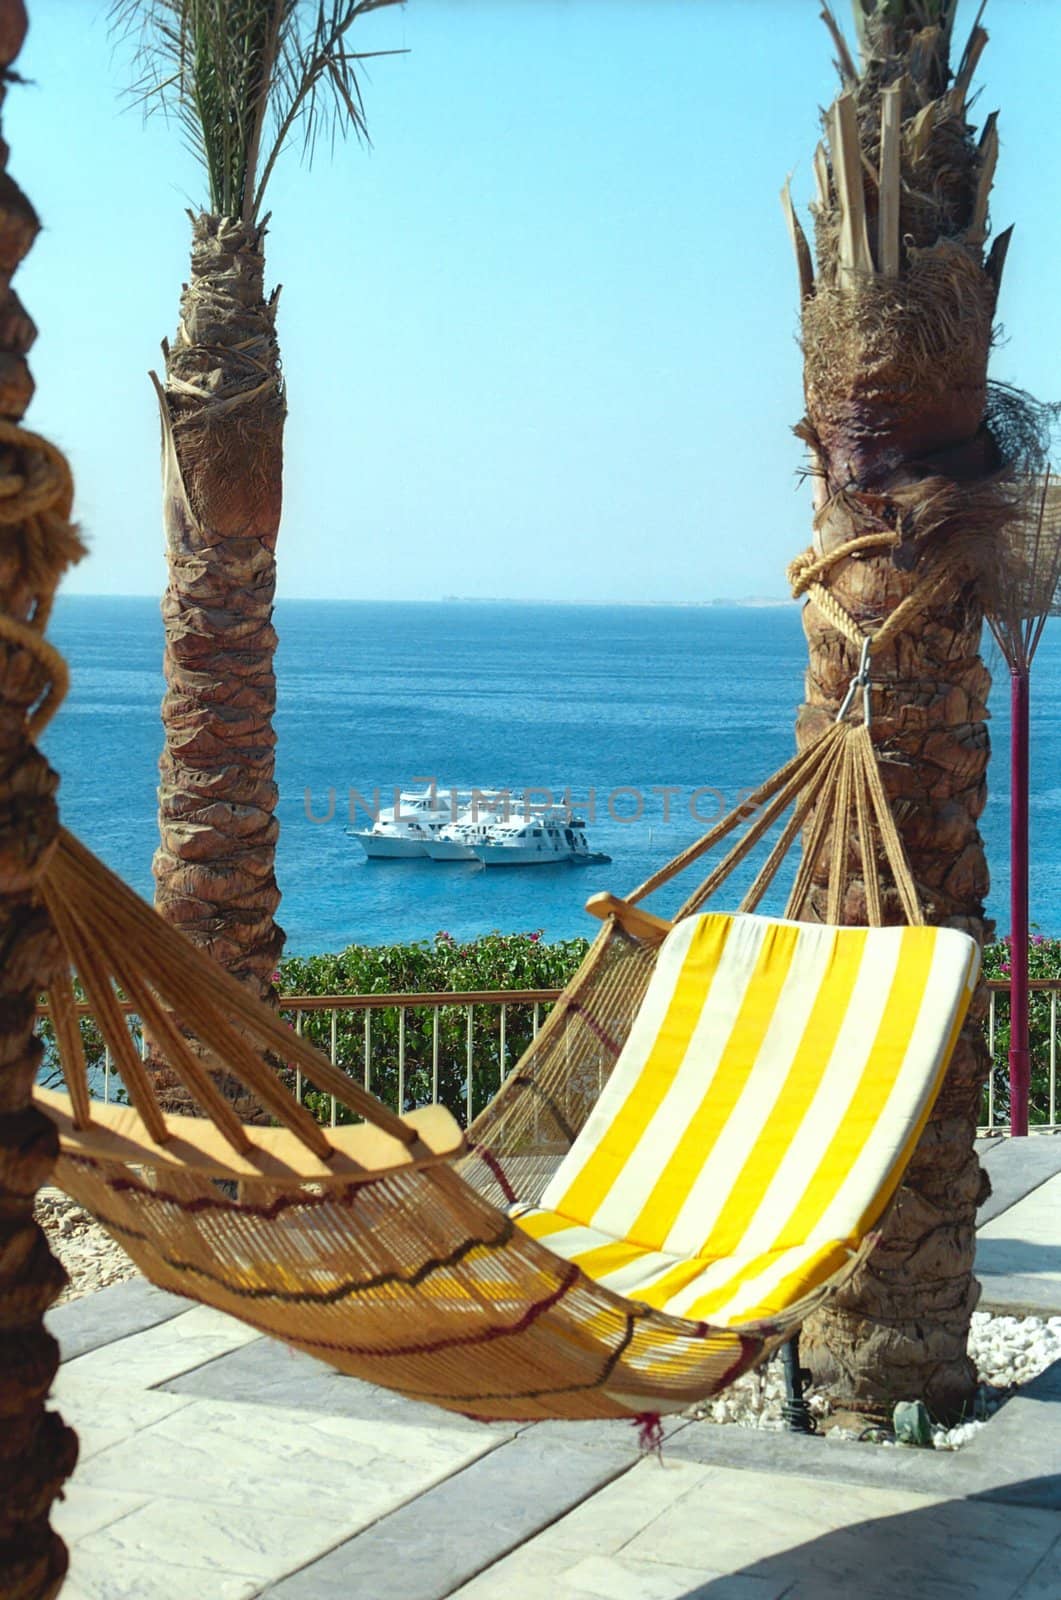 A hammock with the striped mattress is against the Sea and three cruisers